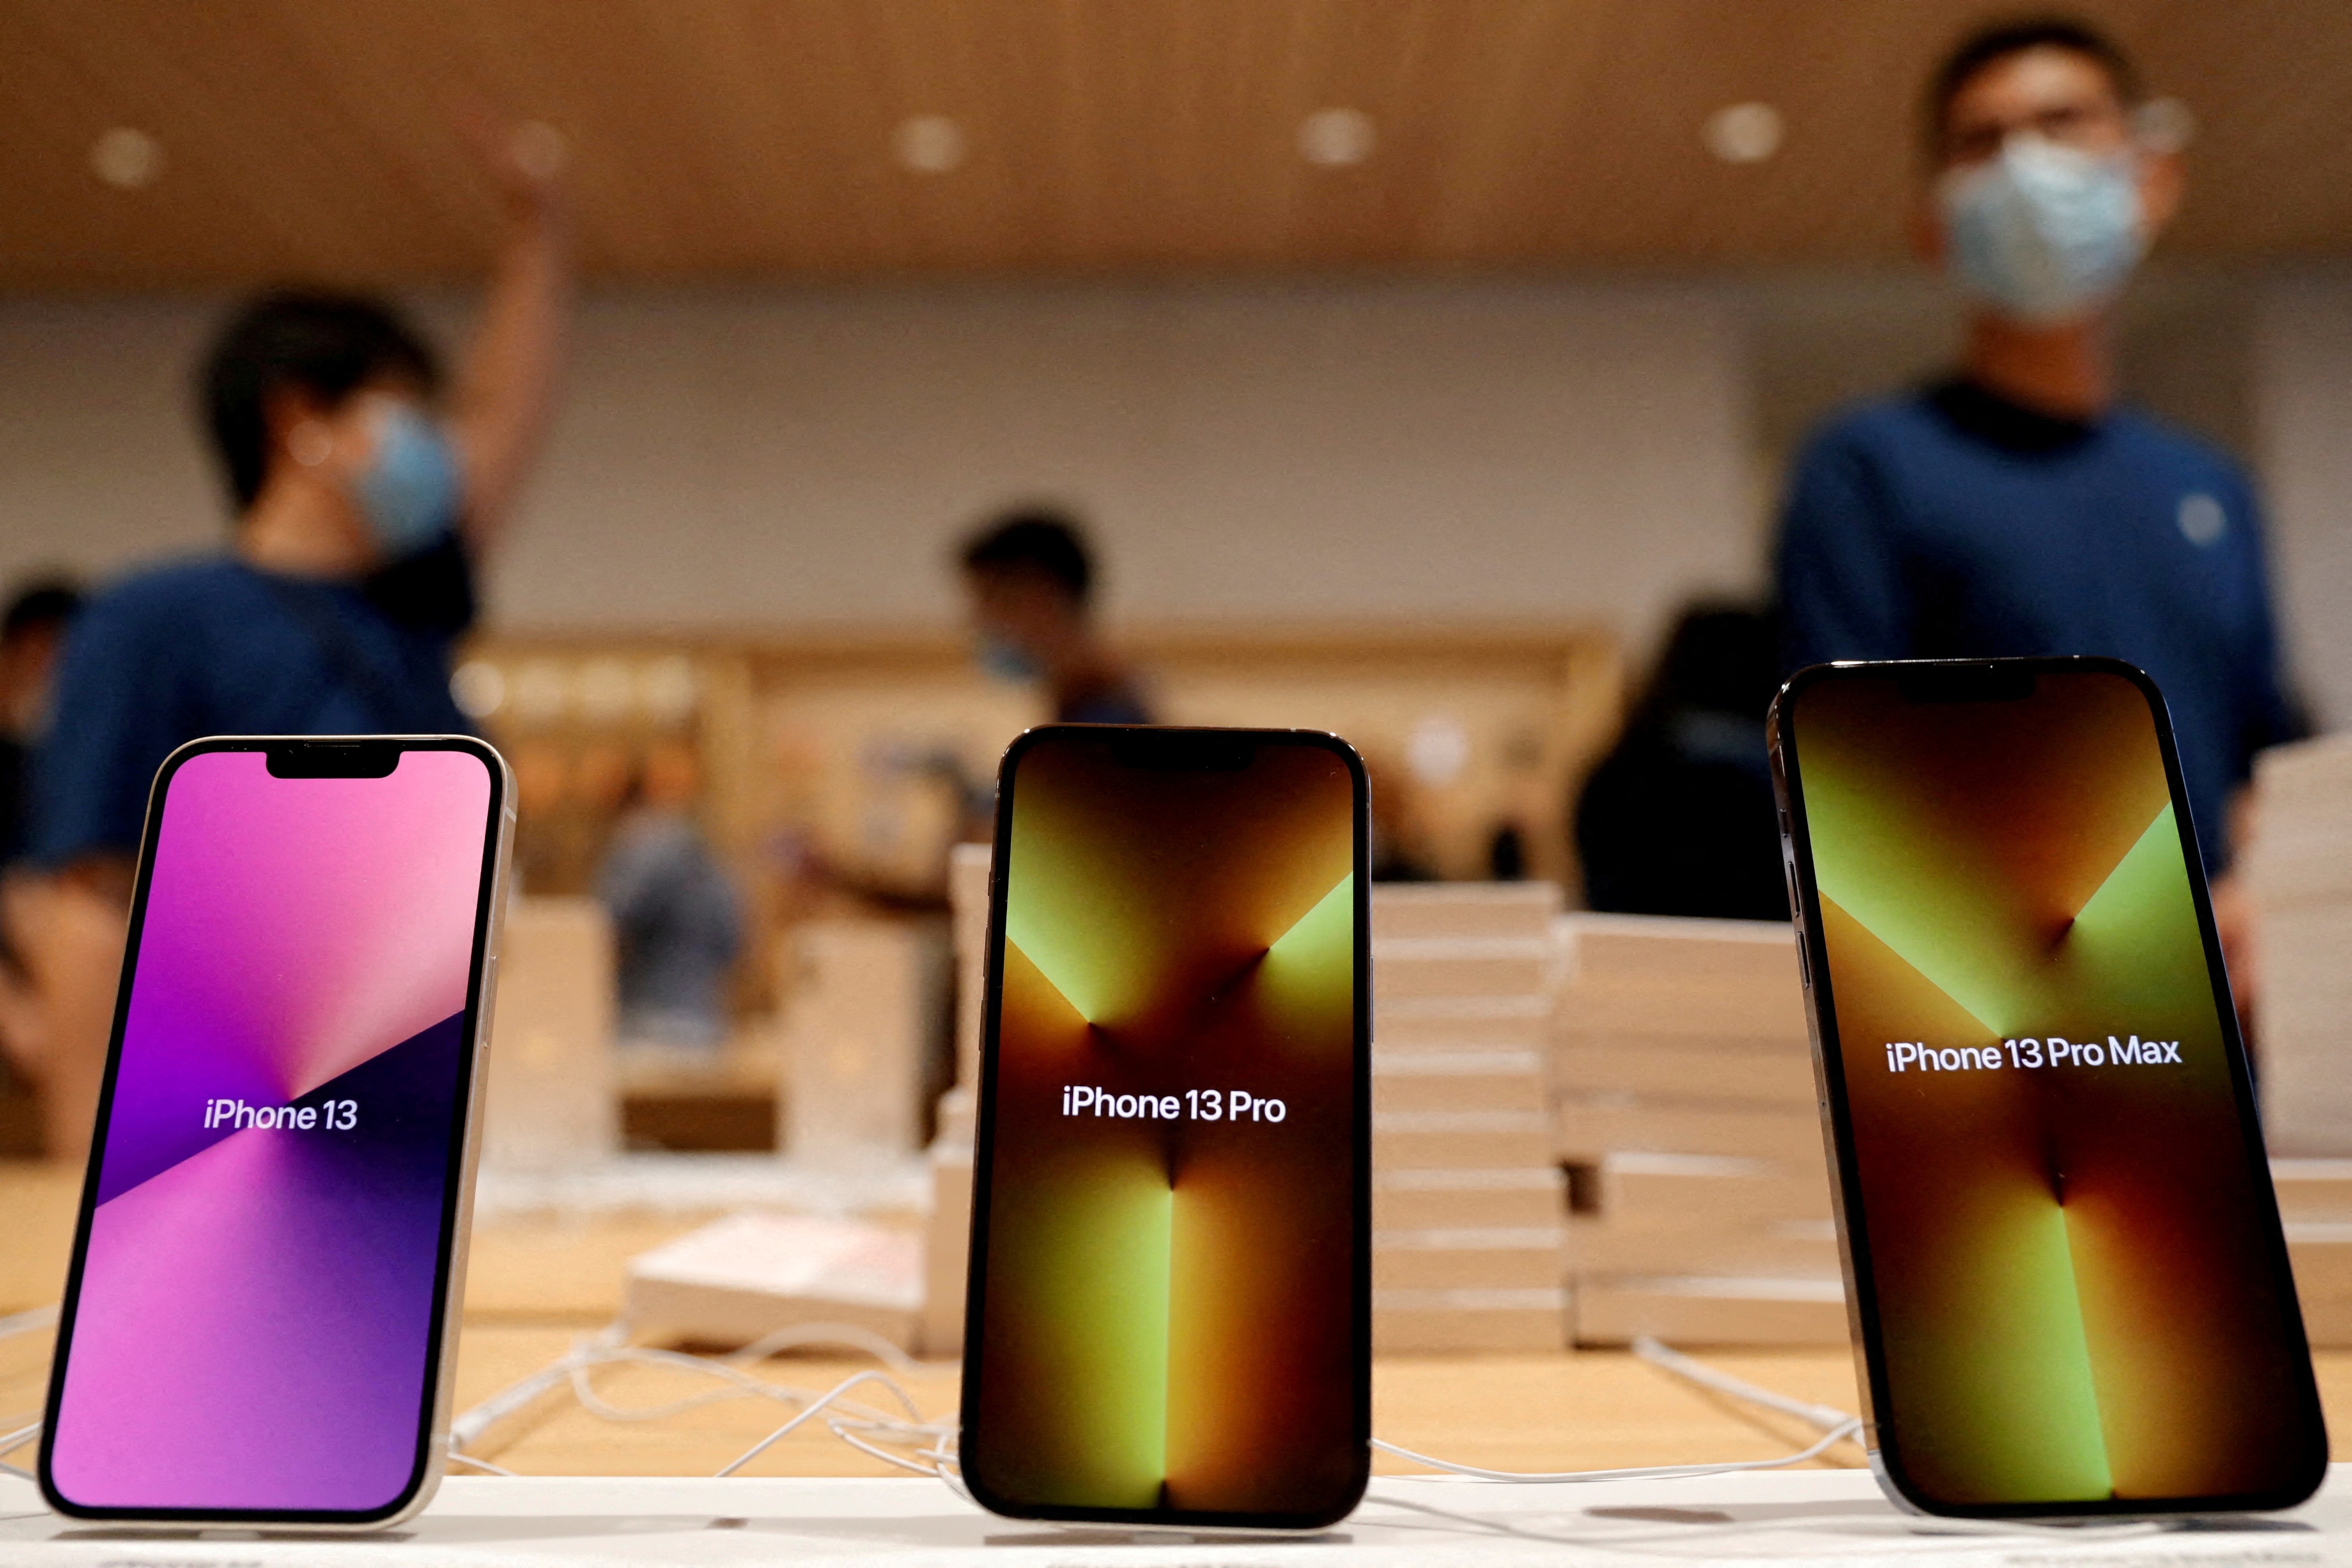 Apple's iPhone 13 models are pictured at an Apple Store in Beijing